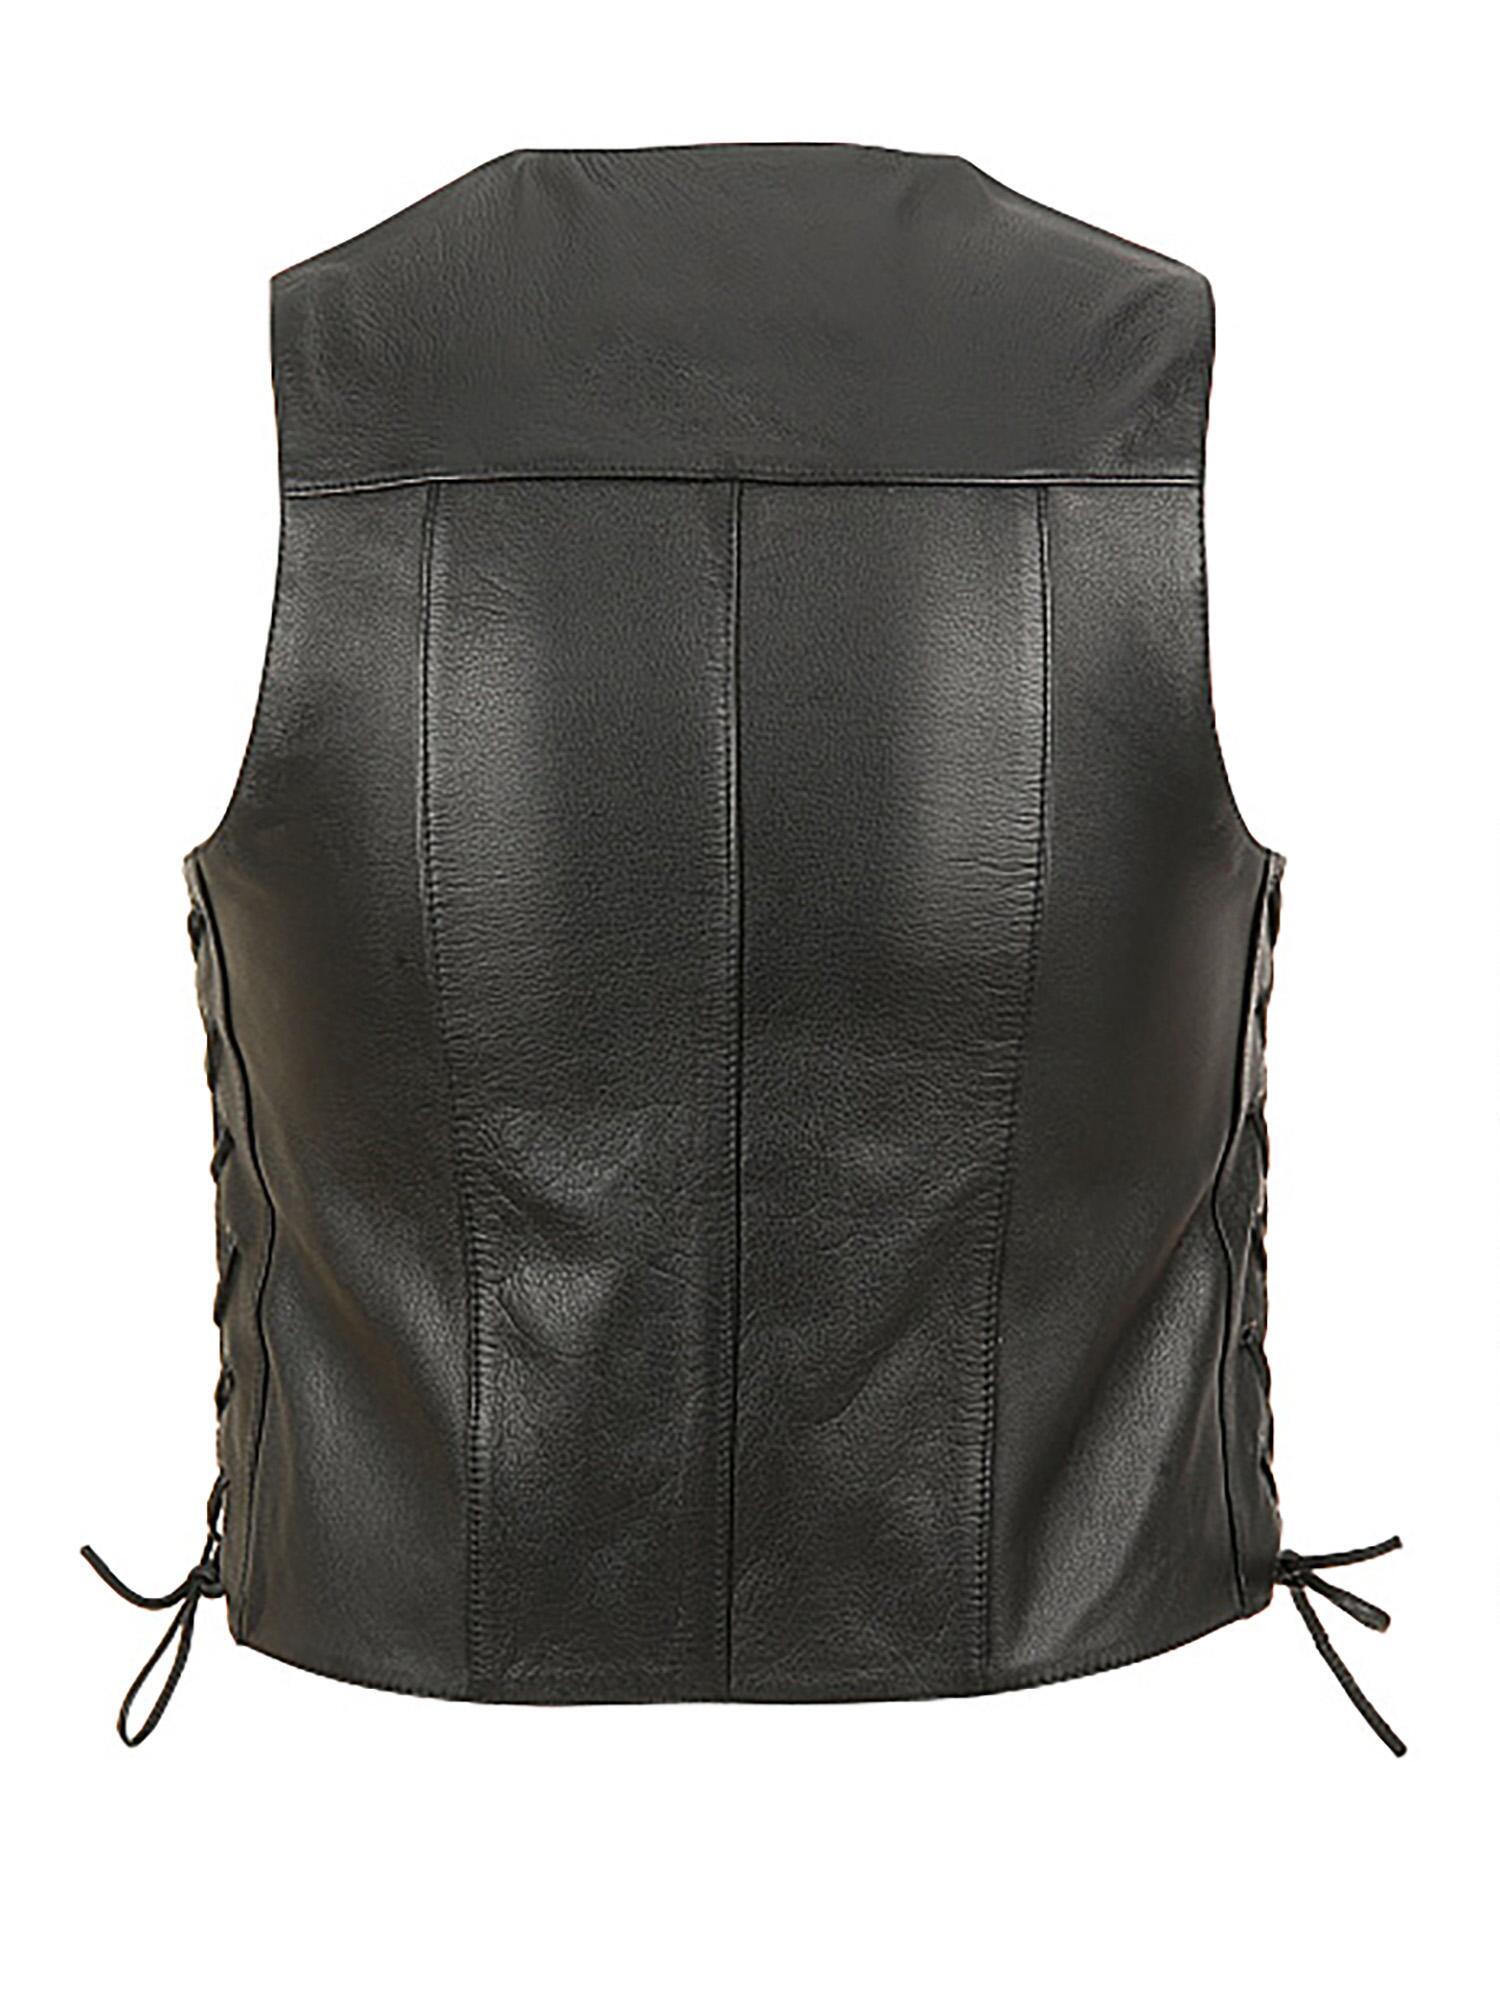 Wilsons Leather Don Leather Rider Vest in Black for Men - Lyst